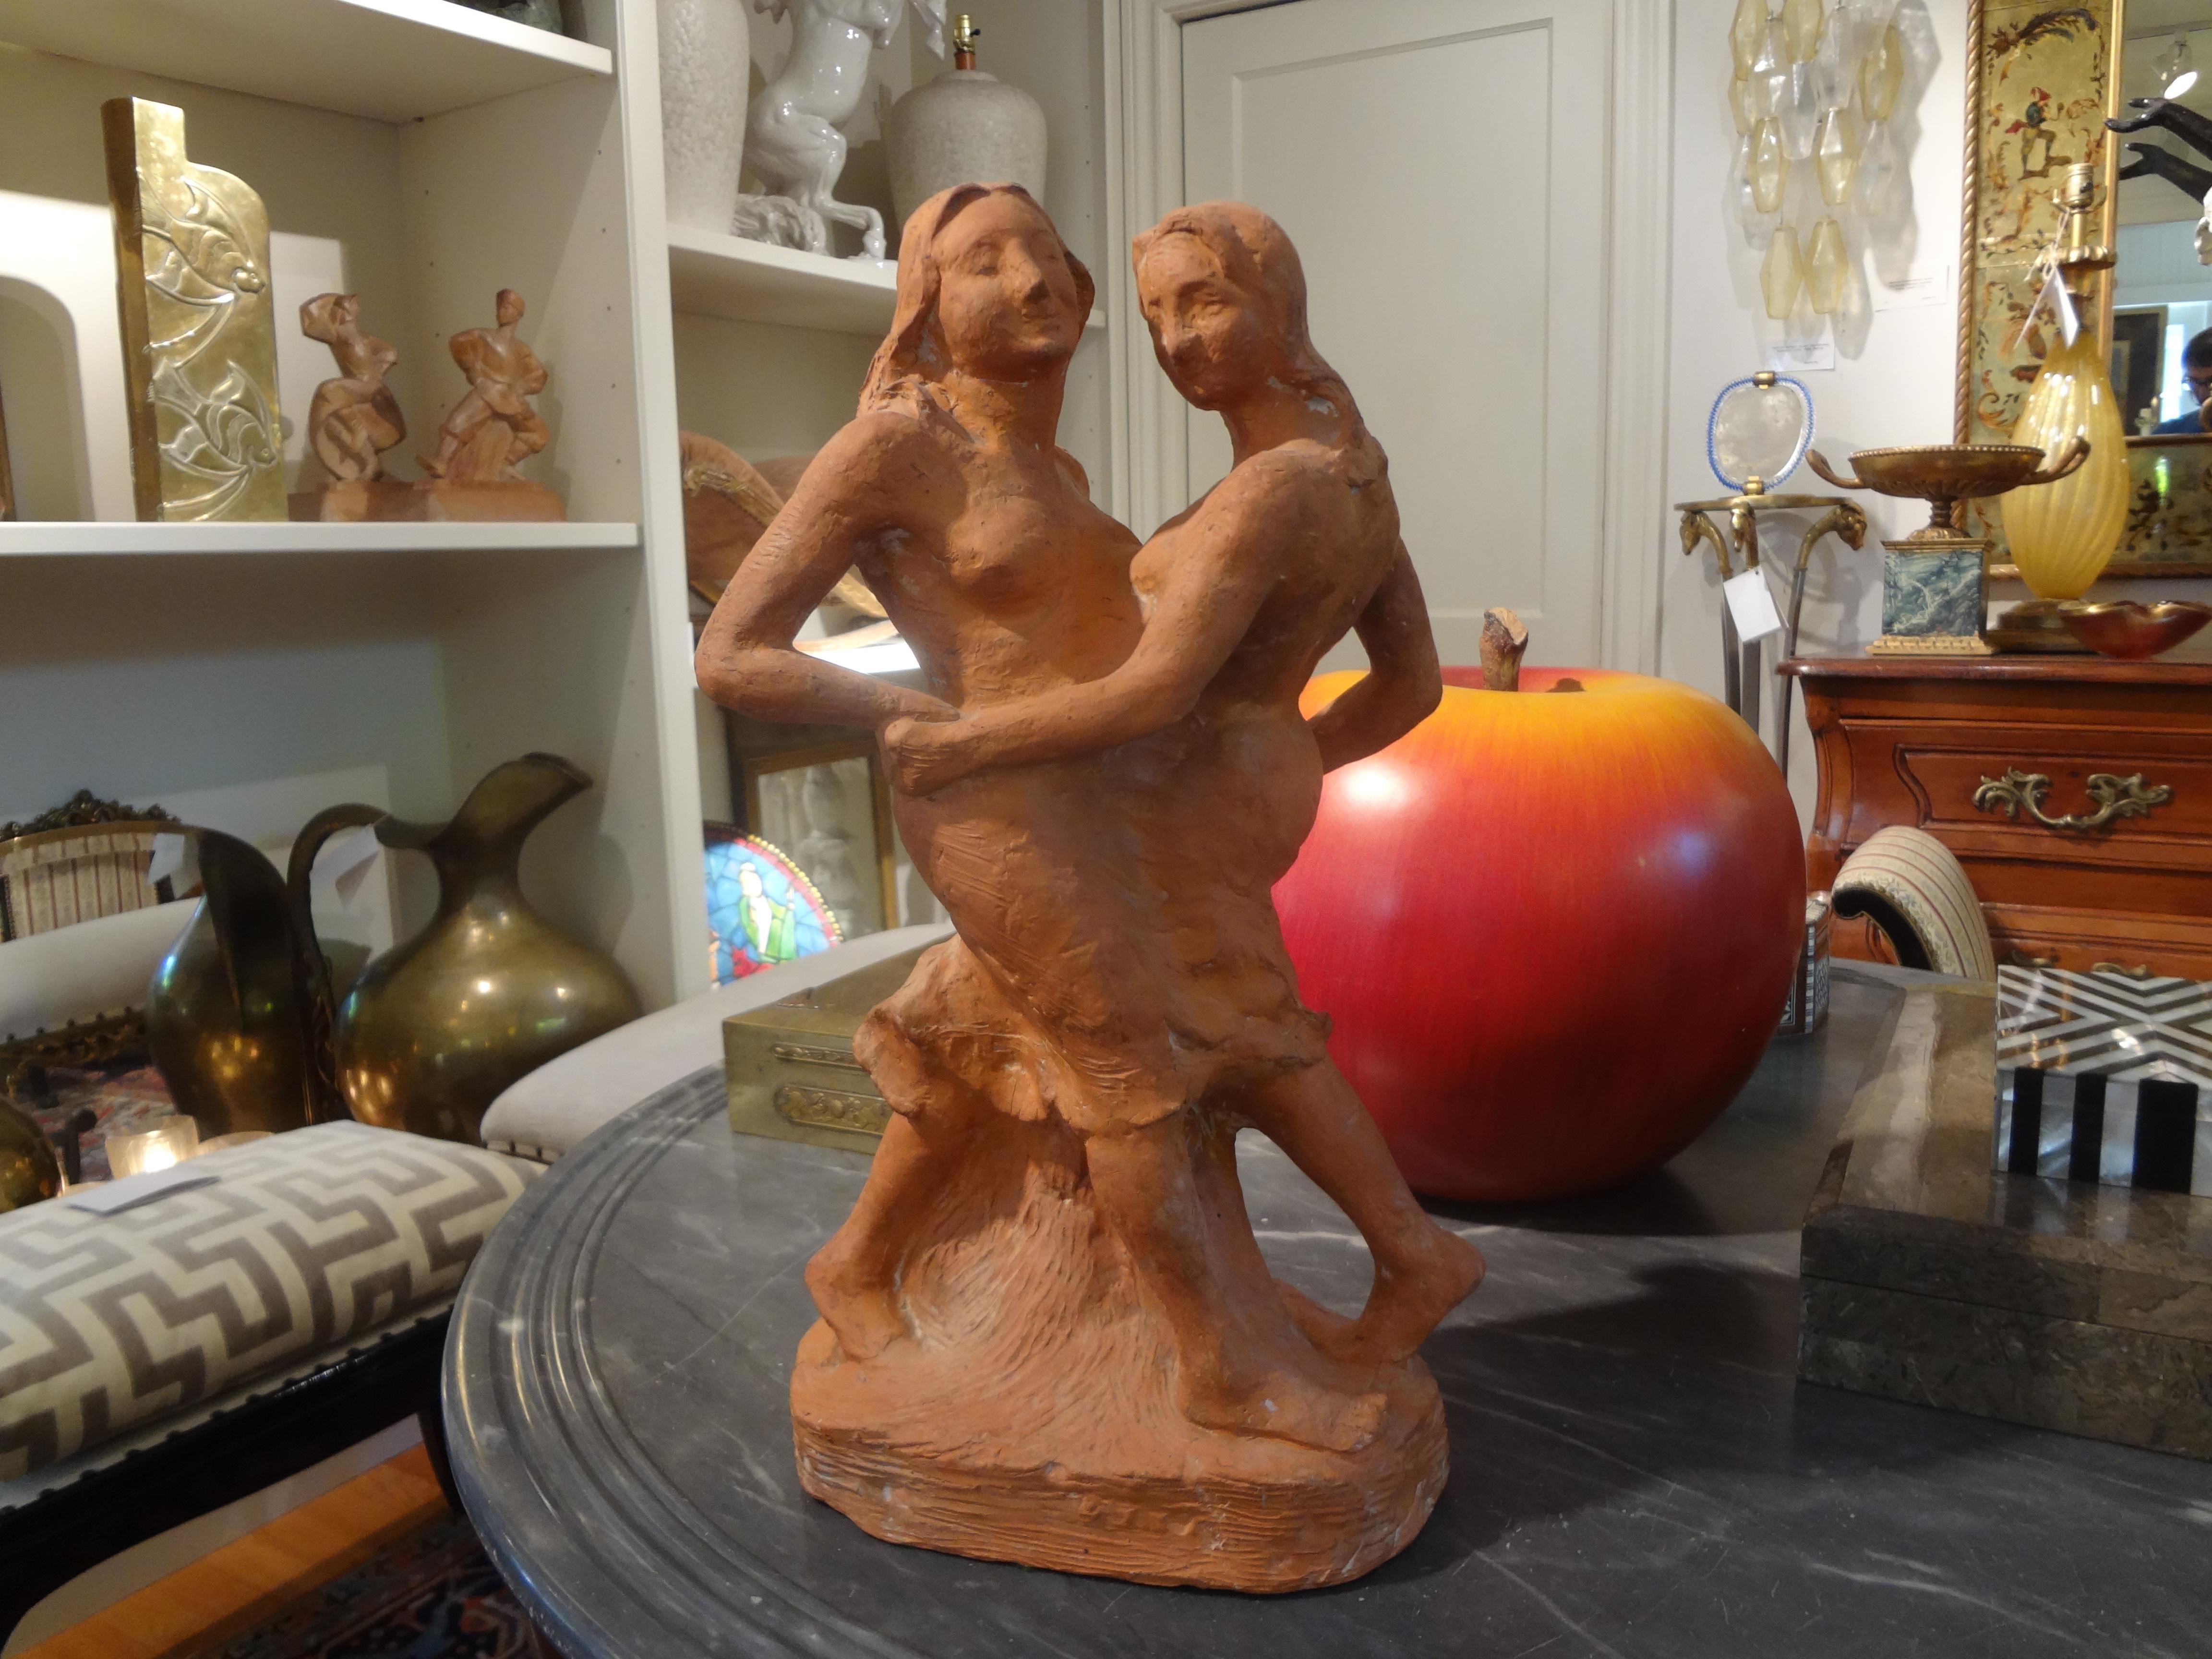 Antique French Terracotta sculpture signed T. Foris.
Well executed French terra cotta sculpture signed T. Foris (1921). This lovely French figurative sculpture depicts two stylized dancing maidens.